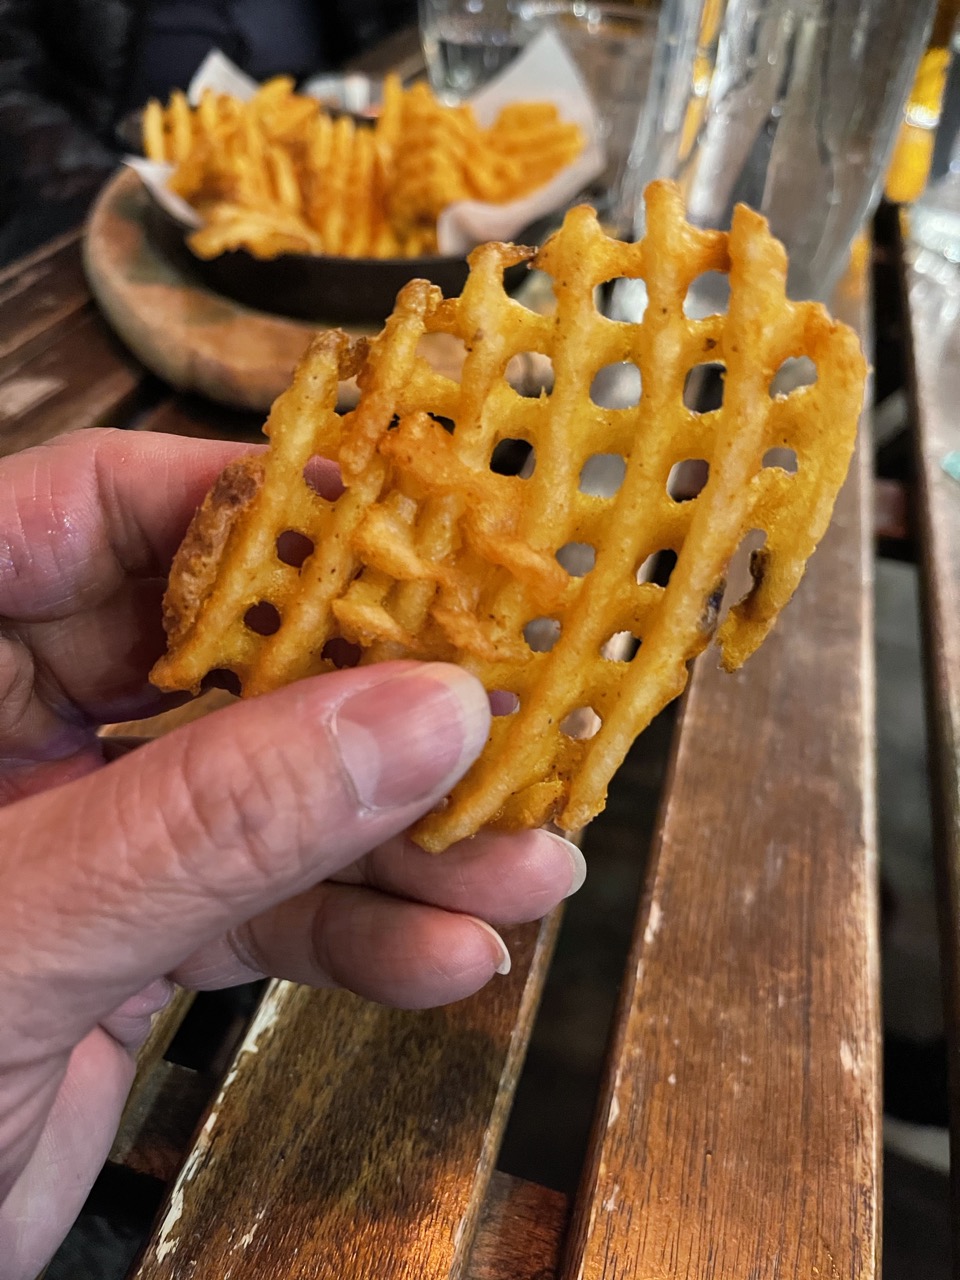 A Picture of william fuentes holding a Waffle Frie